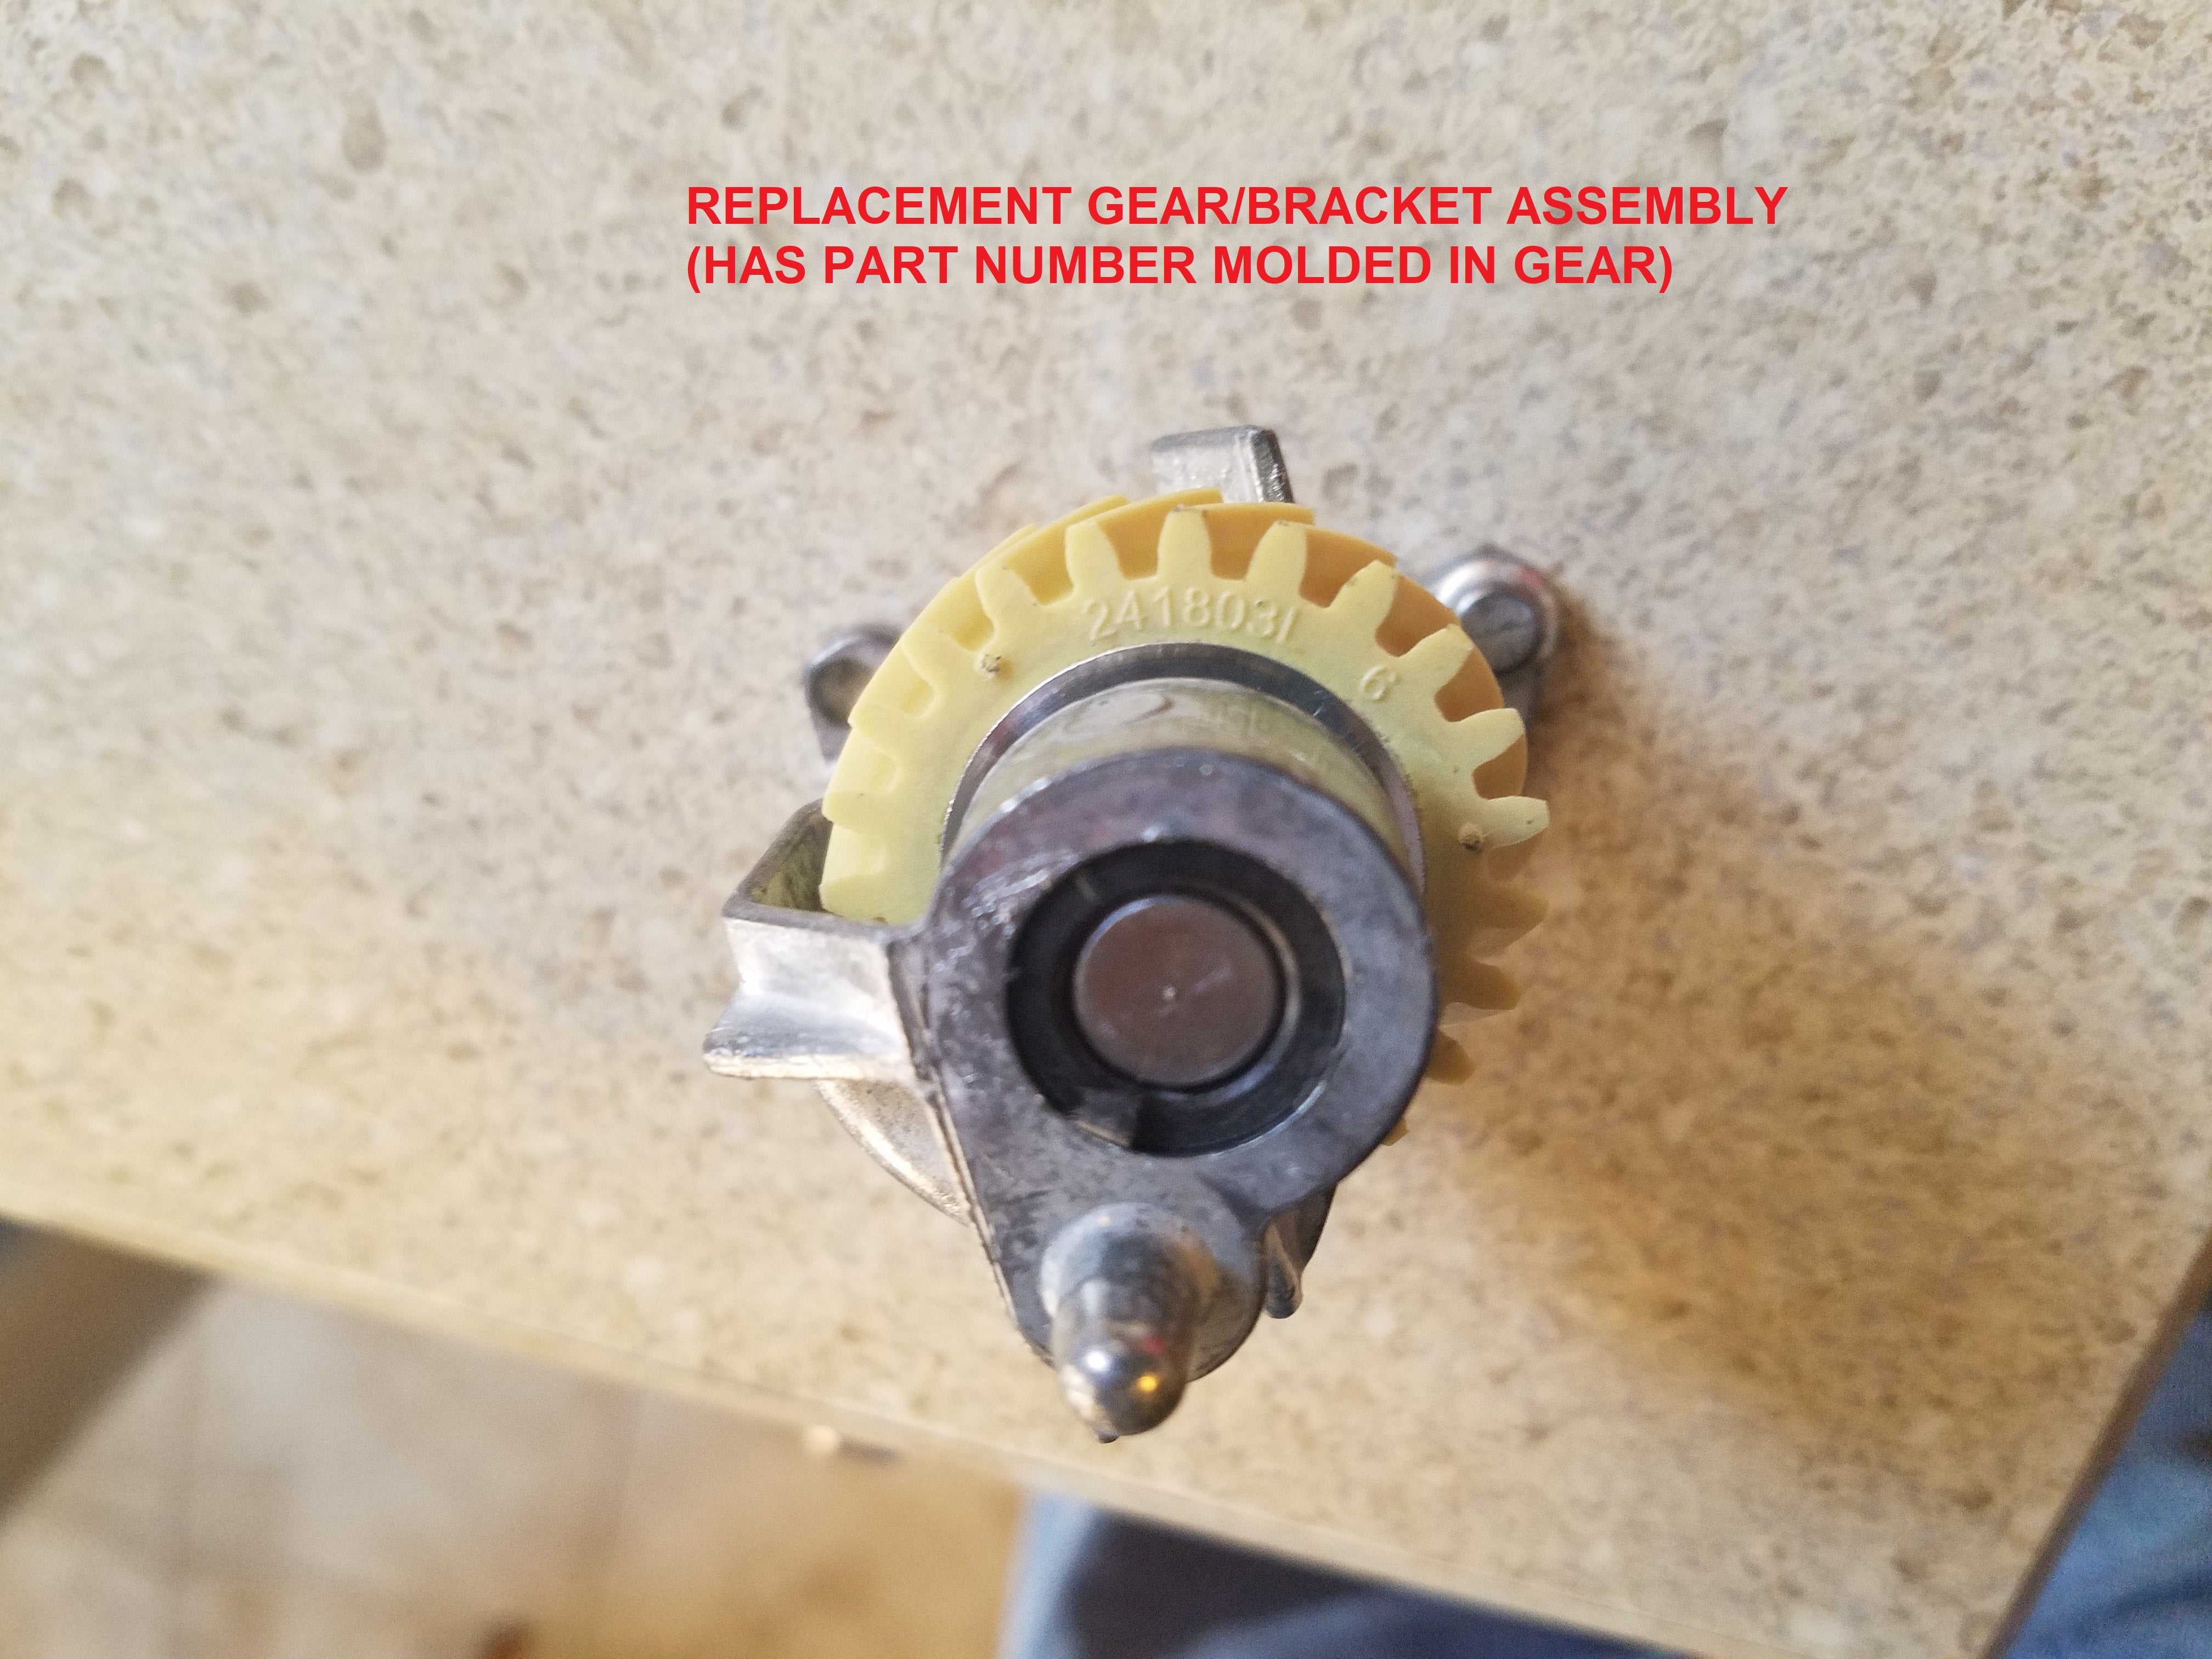 https://www.diychatroom.com/attachments/replacement-gear-and-bracket-assy-jpg.690185/